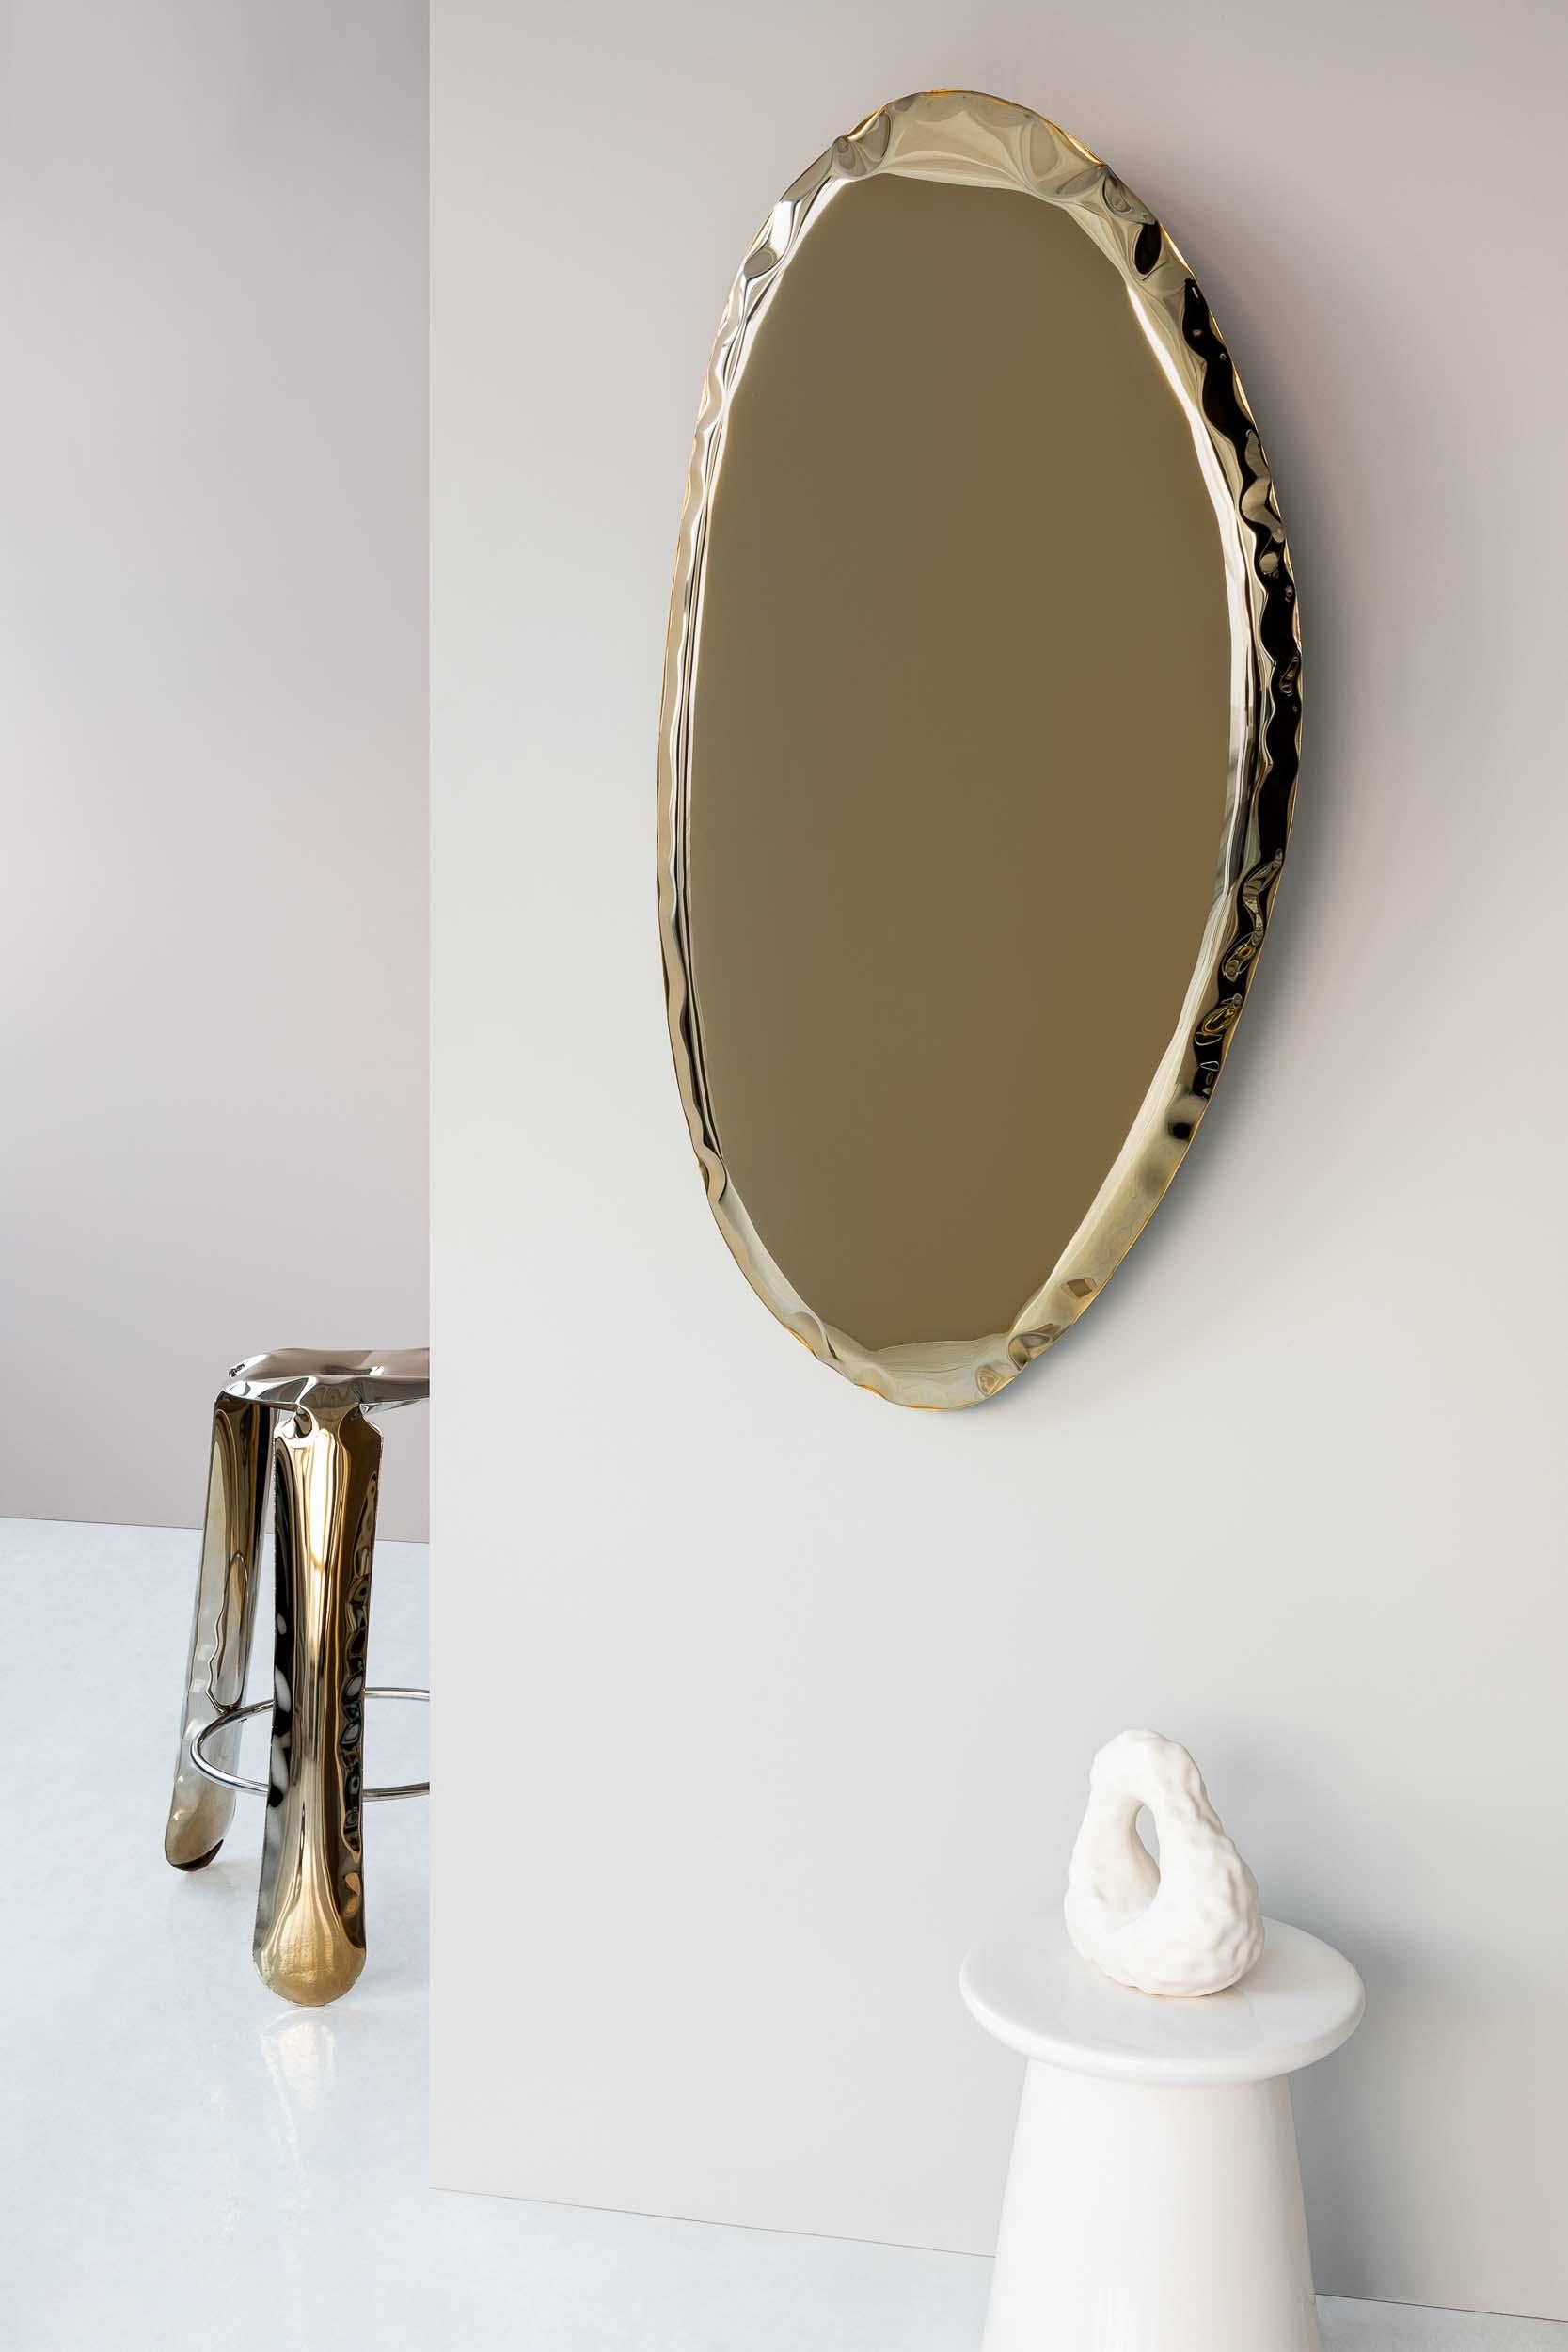 Contemporary Mirror 'Tafla O2', AURUM Collection, Classic Gold, by Zieta For Sale 3